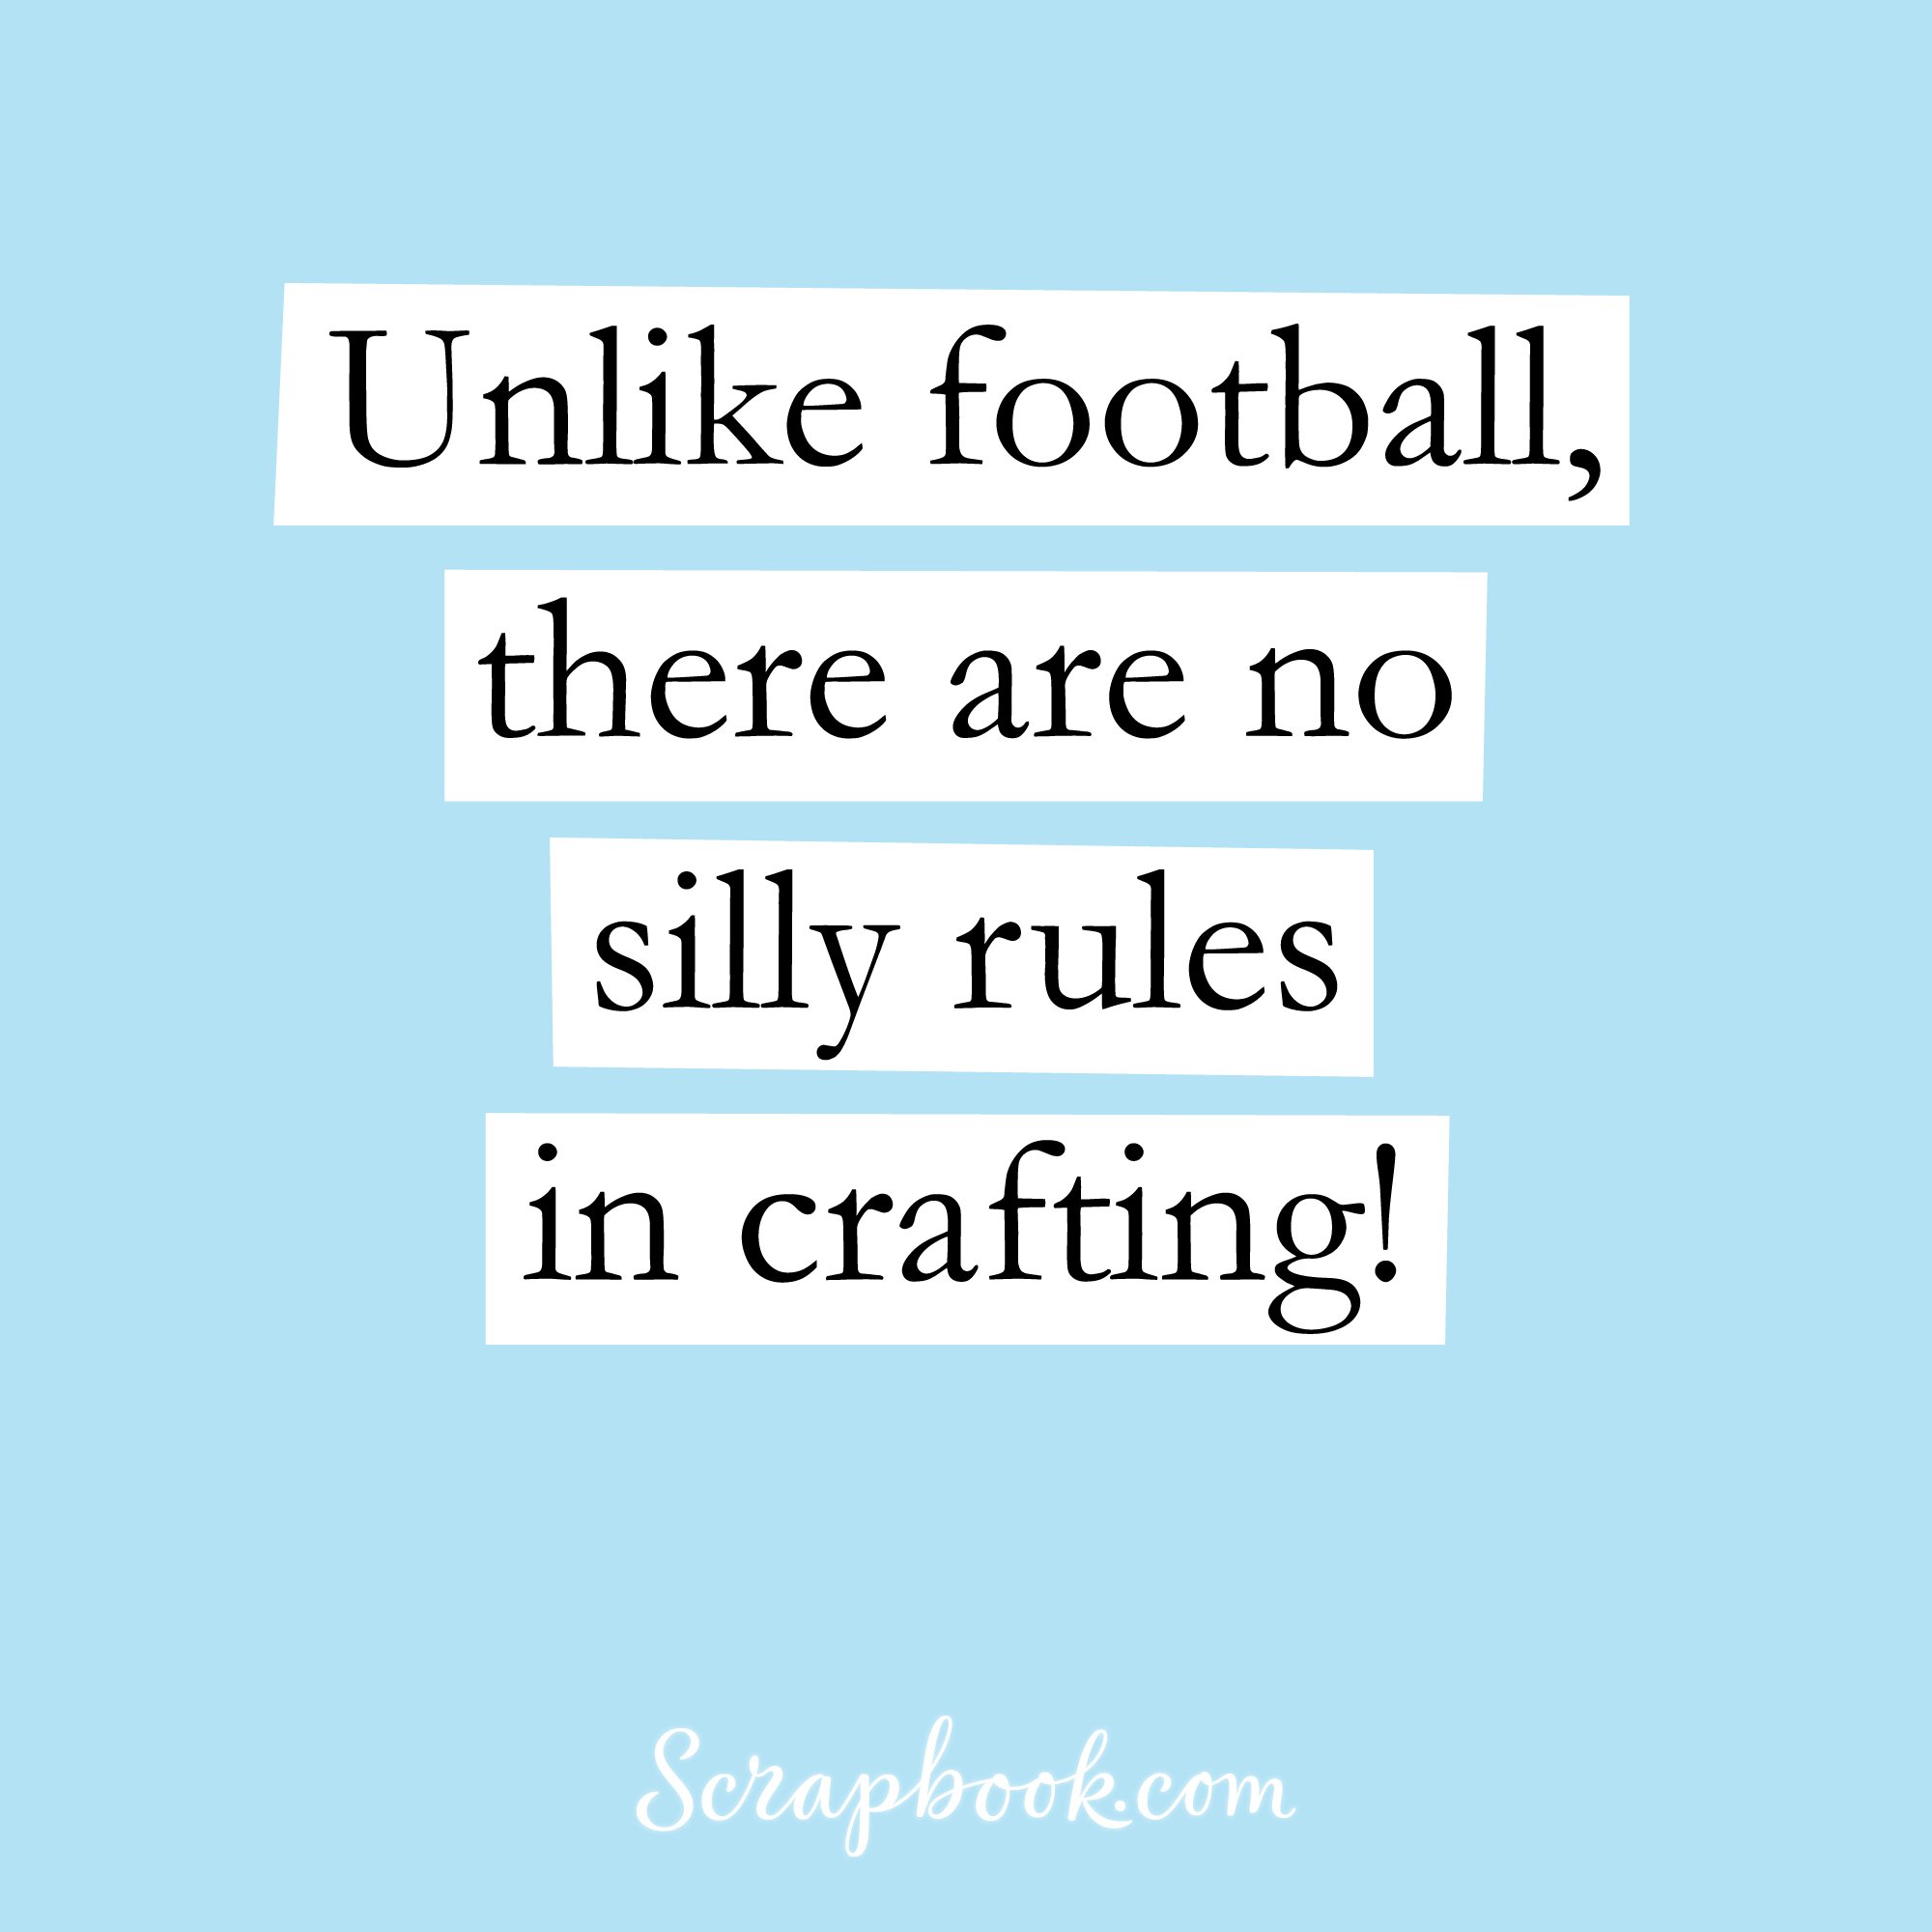 Unlike football, there are no silly rules in crafting!